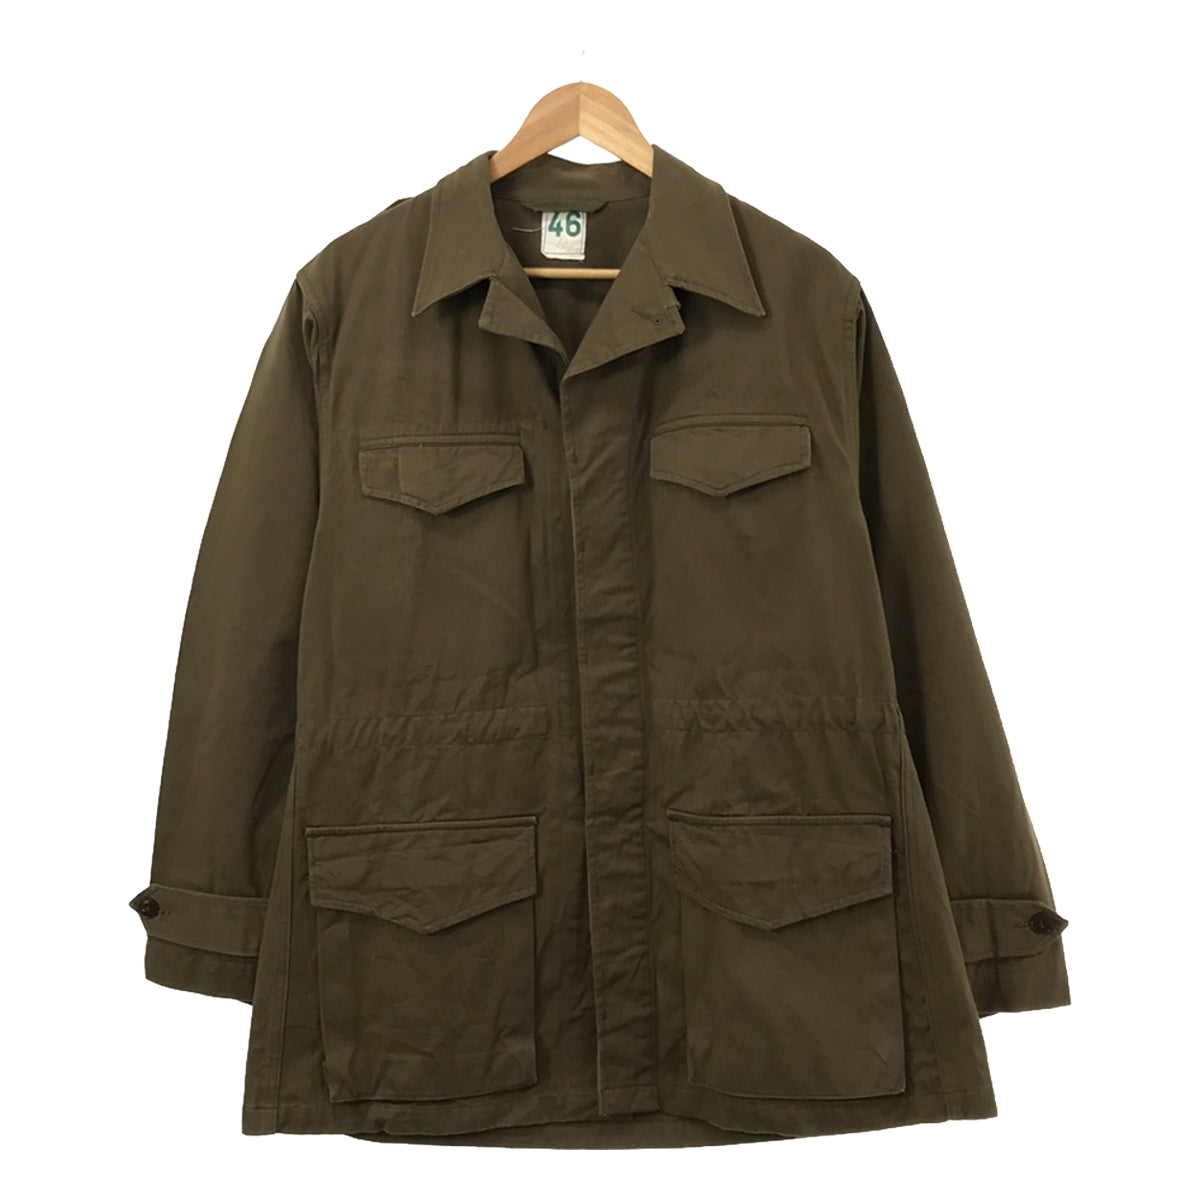 VINTAGE / ヴィンテージ古着 | 60s FRENCH ARMY フランス軍 M-47後期